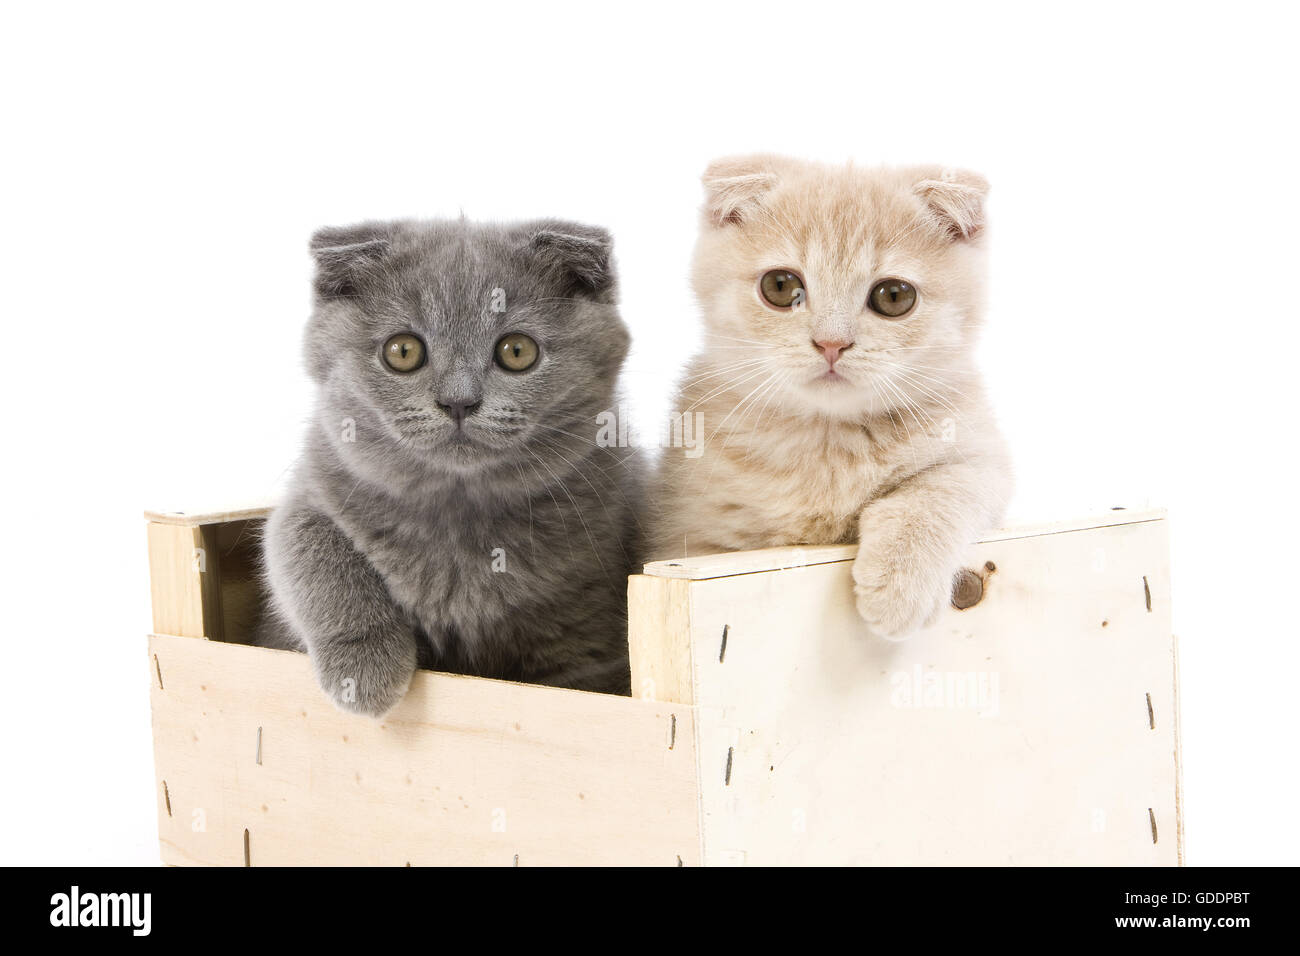 Blue and Cream Scottish Fold Domestic Cat, 2 Months old Kittens standing against White Background Stock Photo